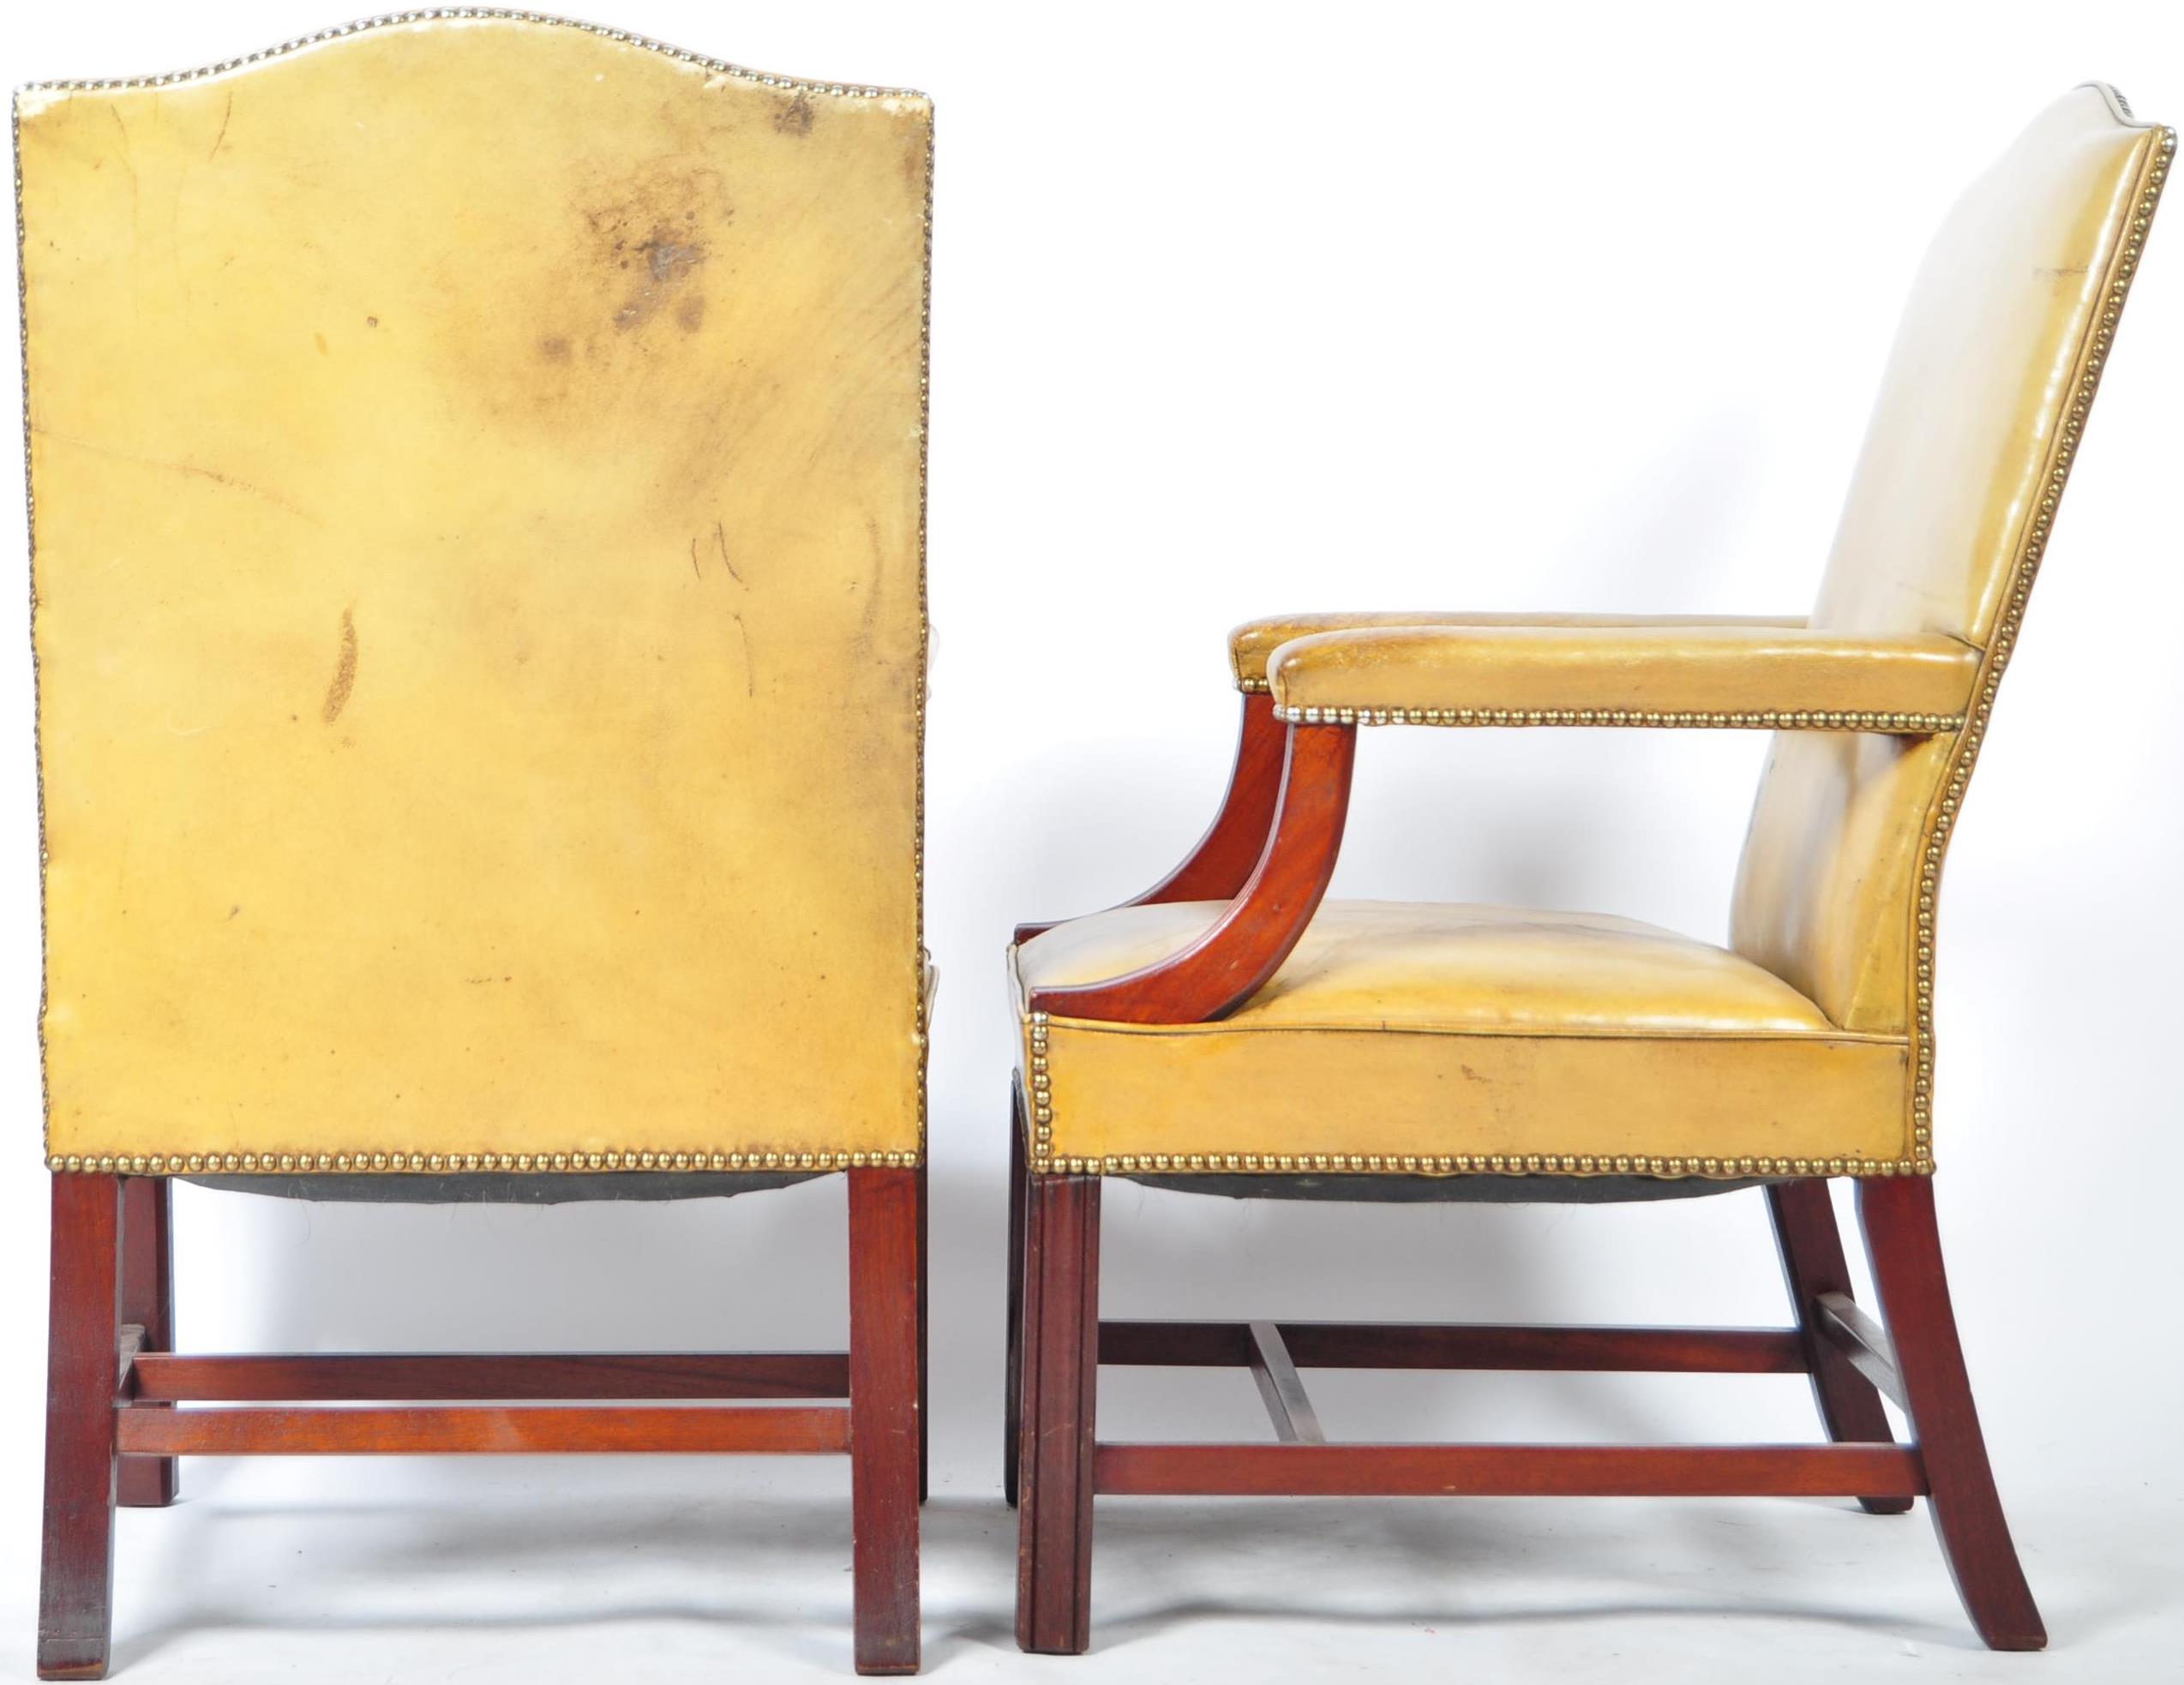 INCREDIBLE SET OF THREE LEATHER AND MAHOGANY GAINSBOROUGH CHAIRS - Image 7 of 7